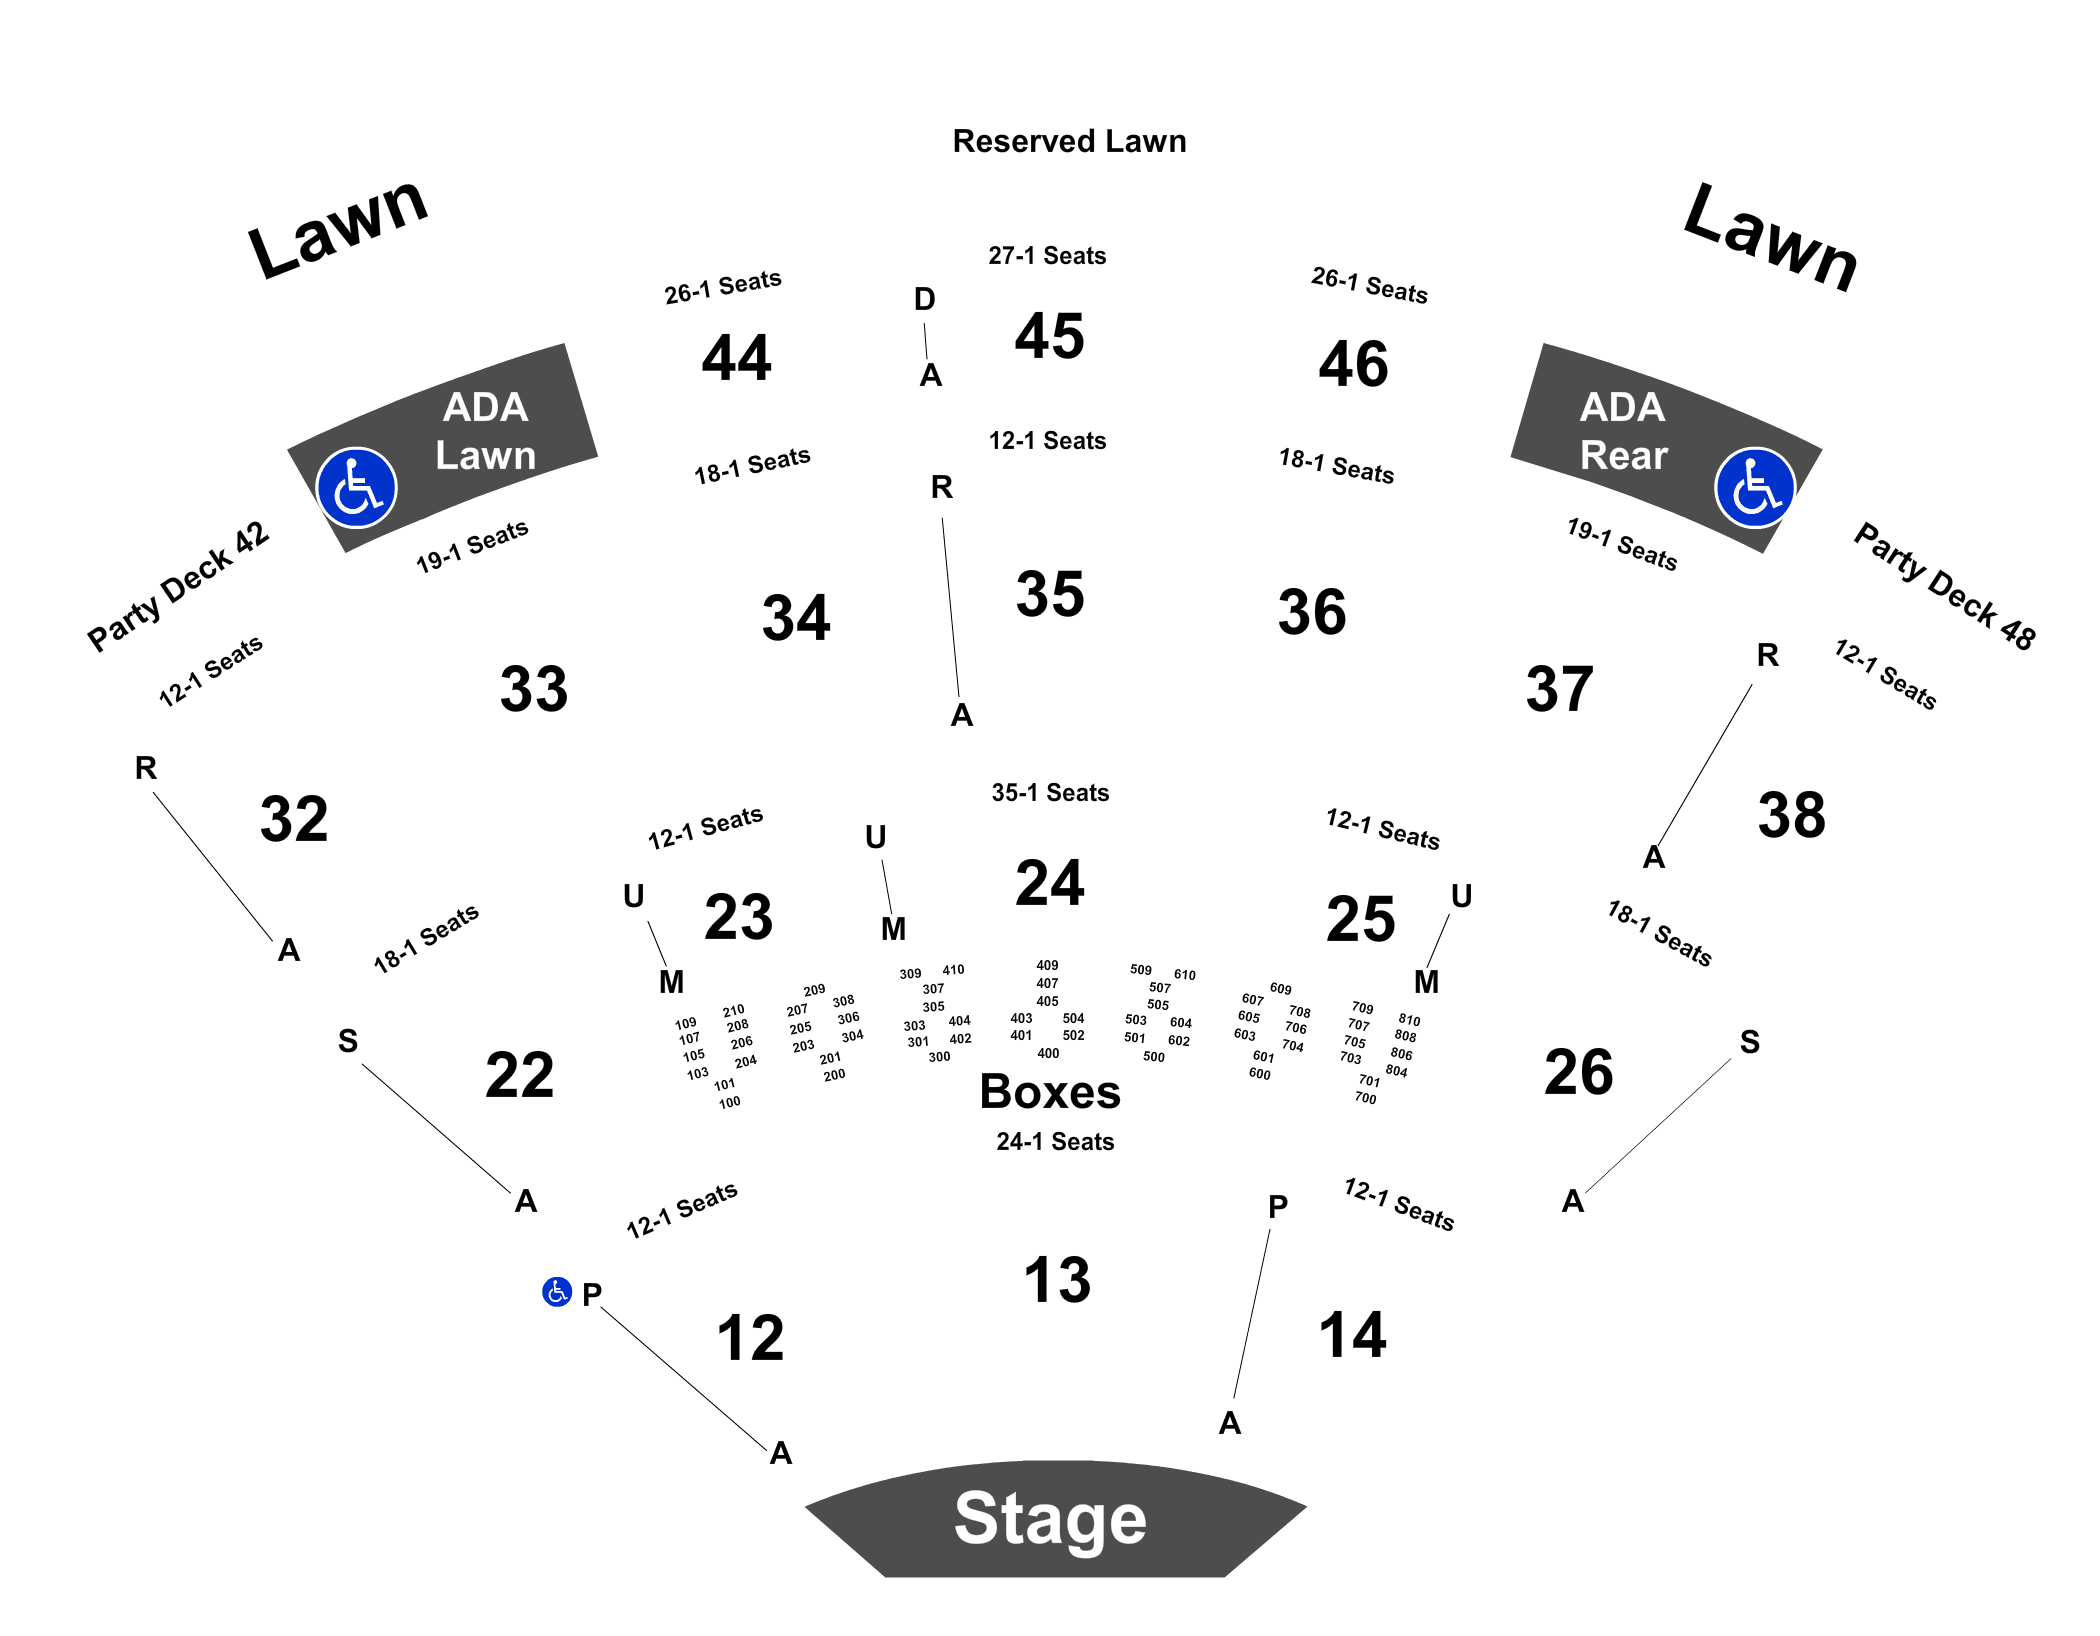 Blossom Music Center Cuyahoga Falls Oh Seating Chart